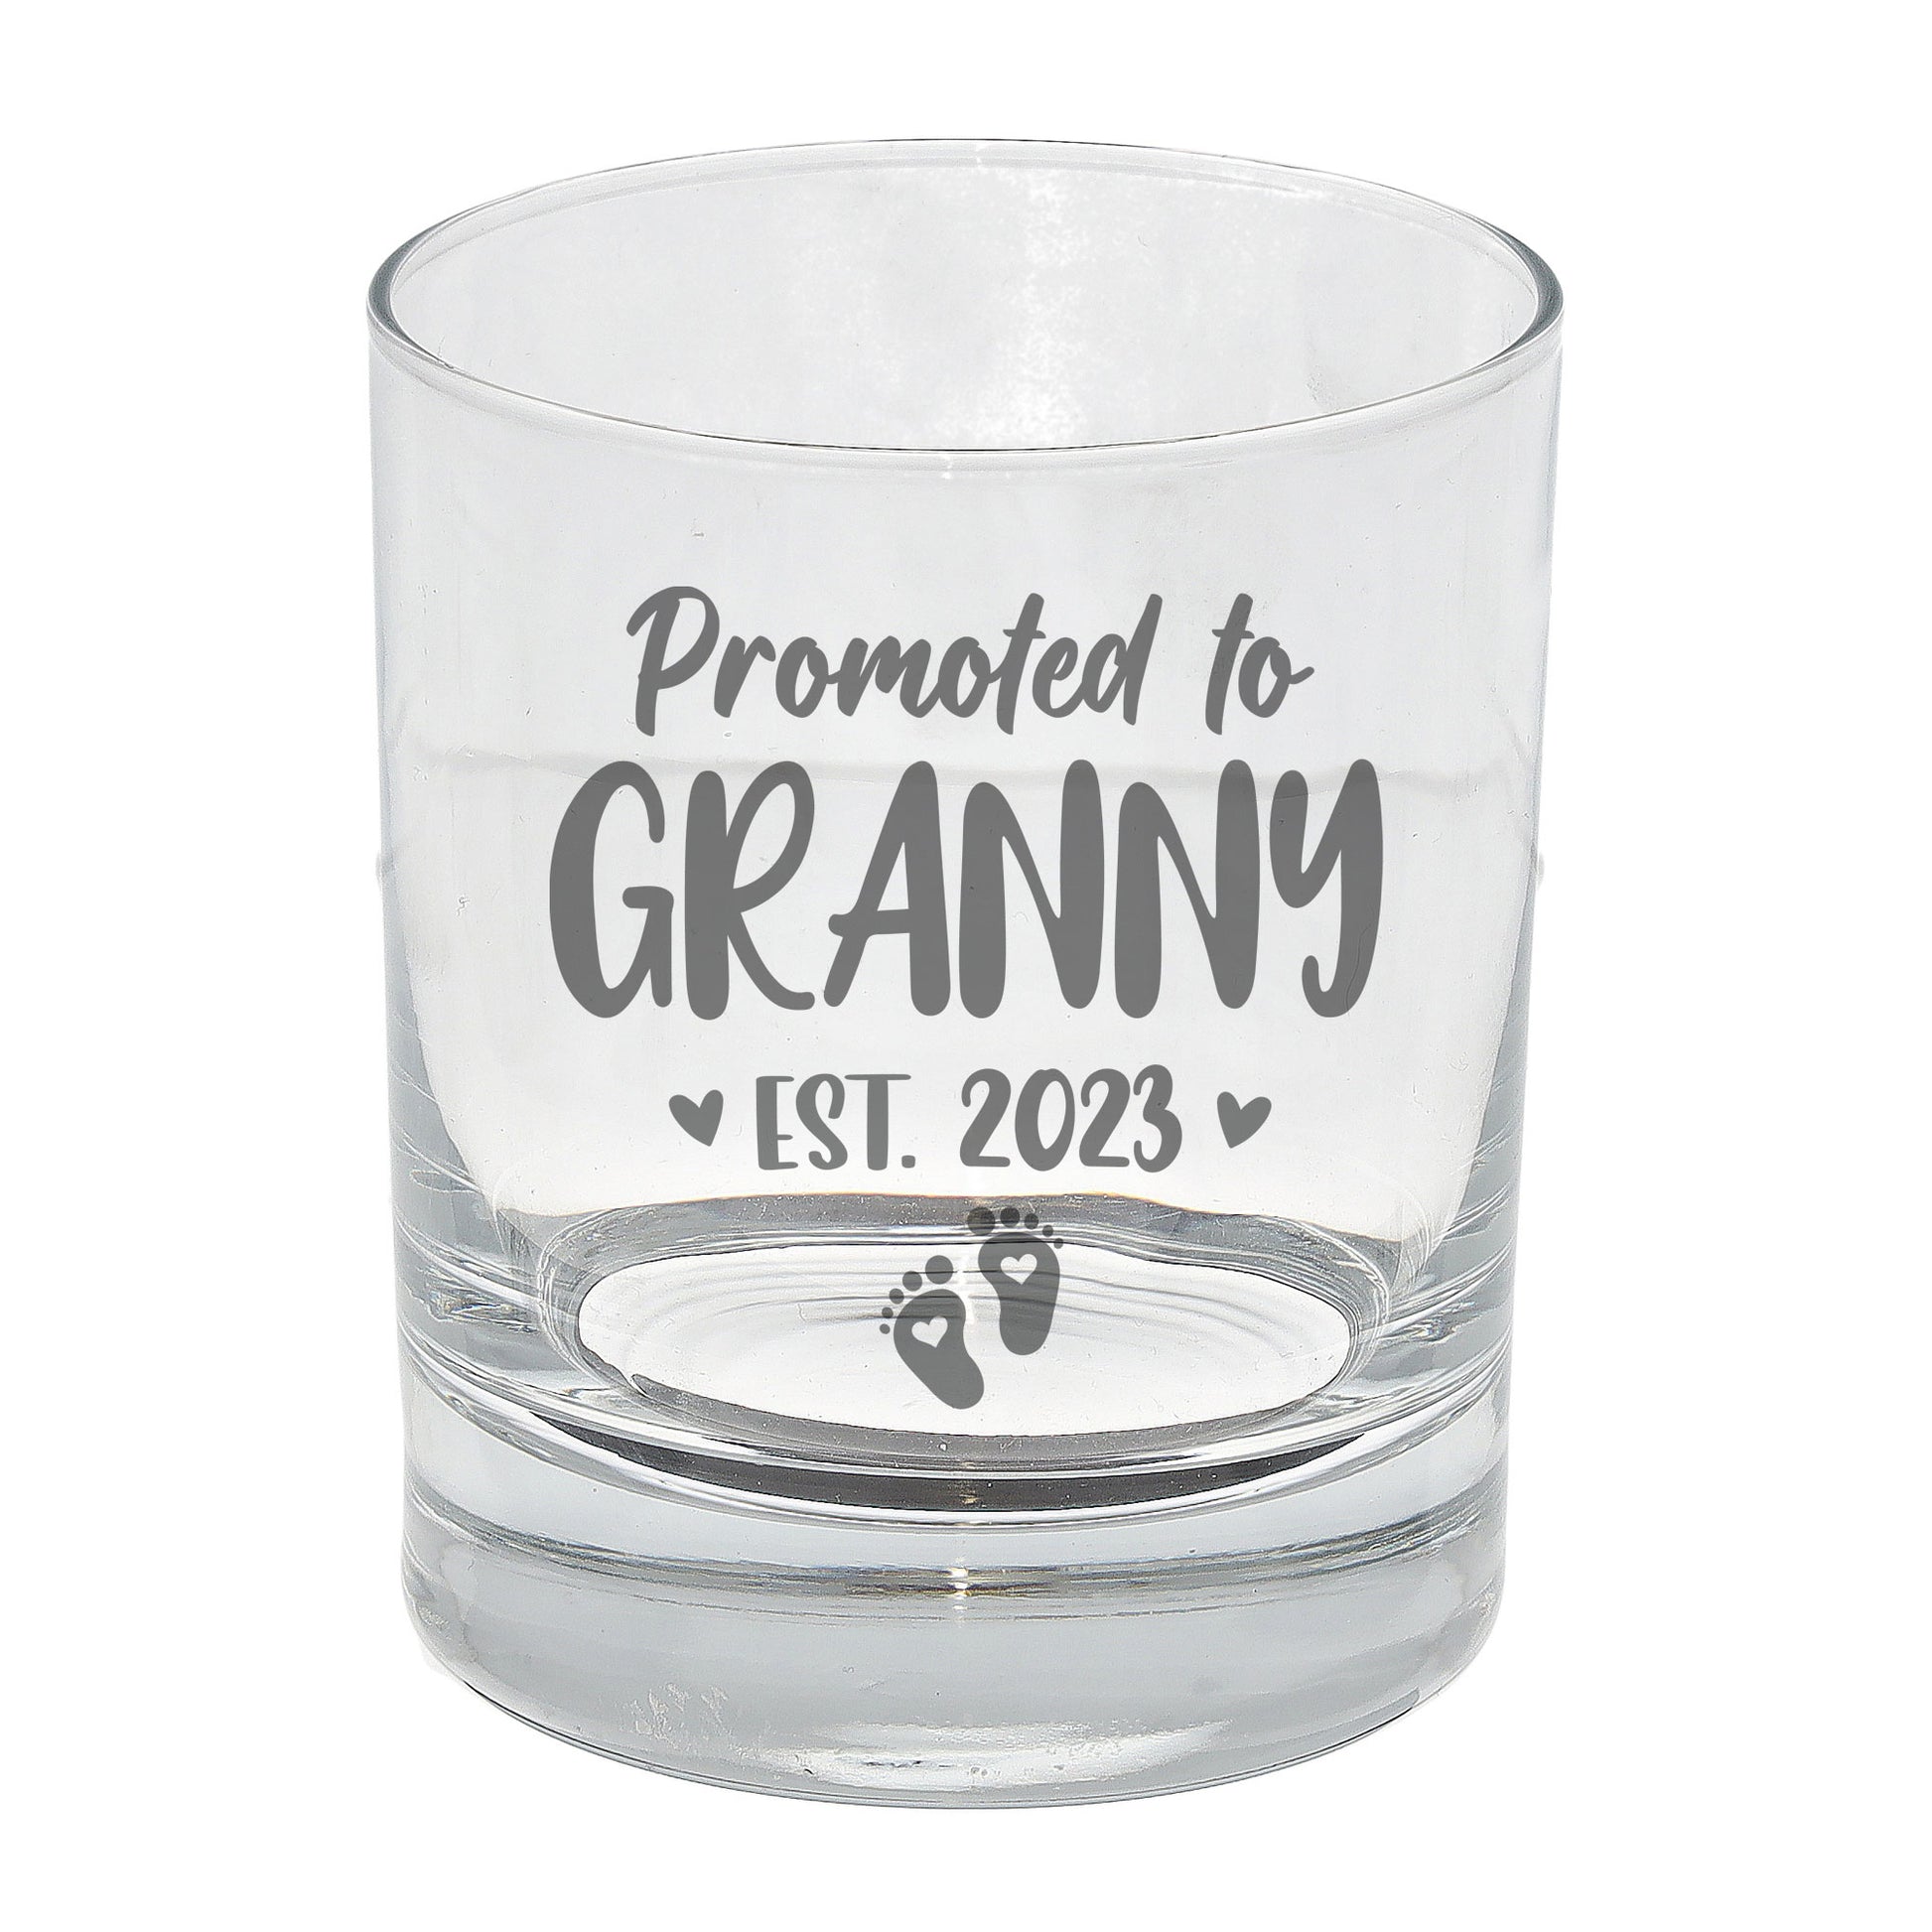 Promoted To Granny Engraved Whisky Glass  - Always Looking Good -   